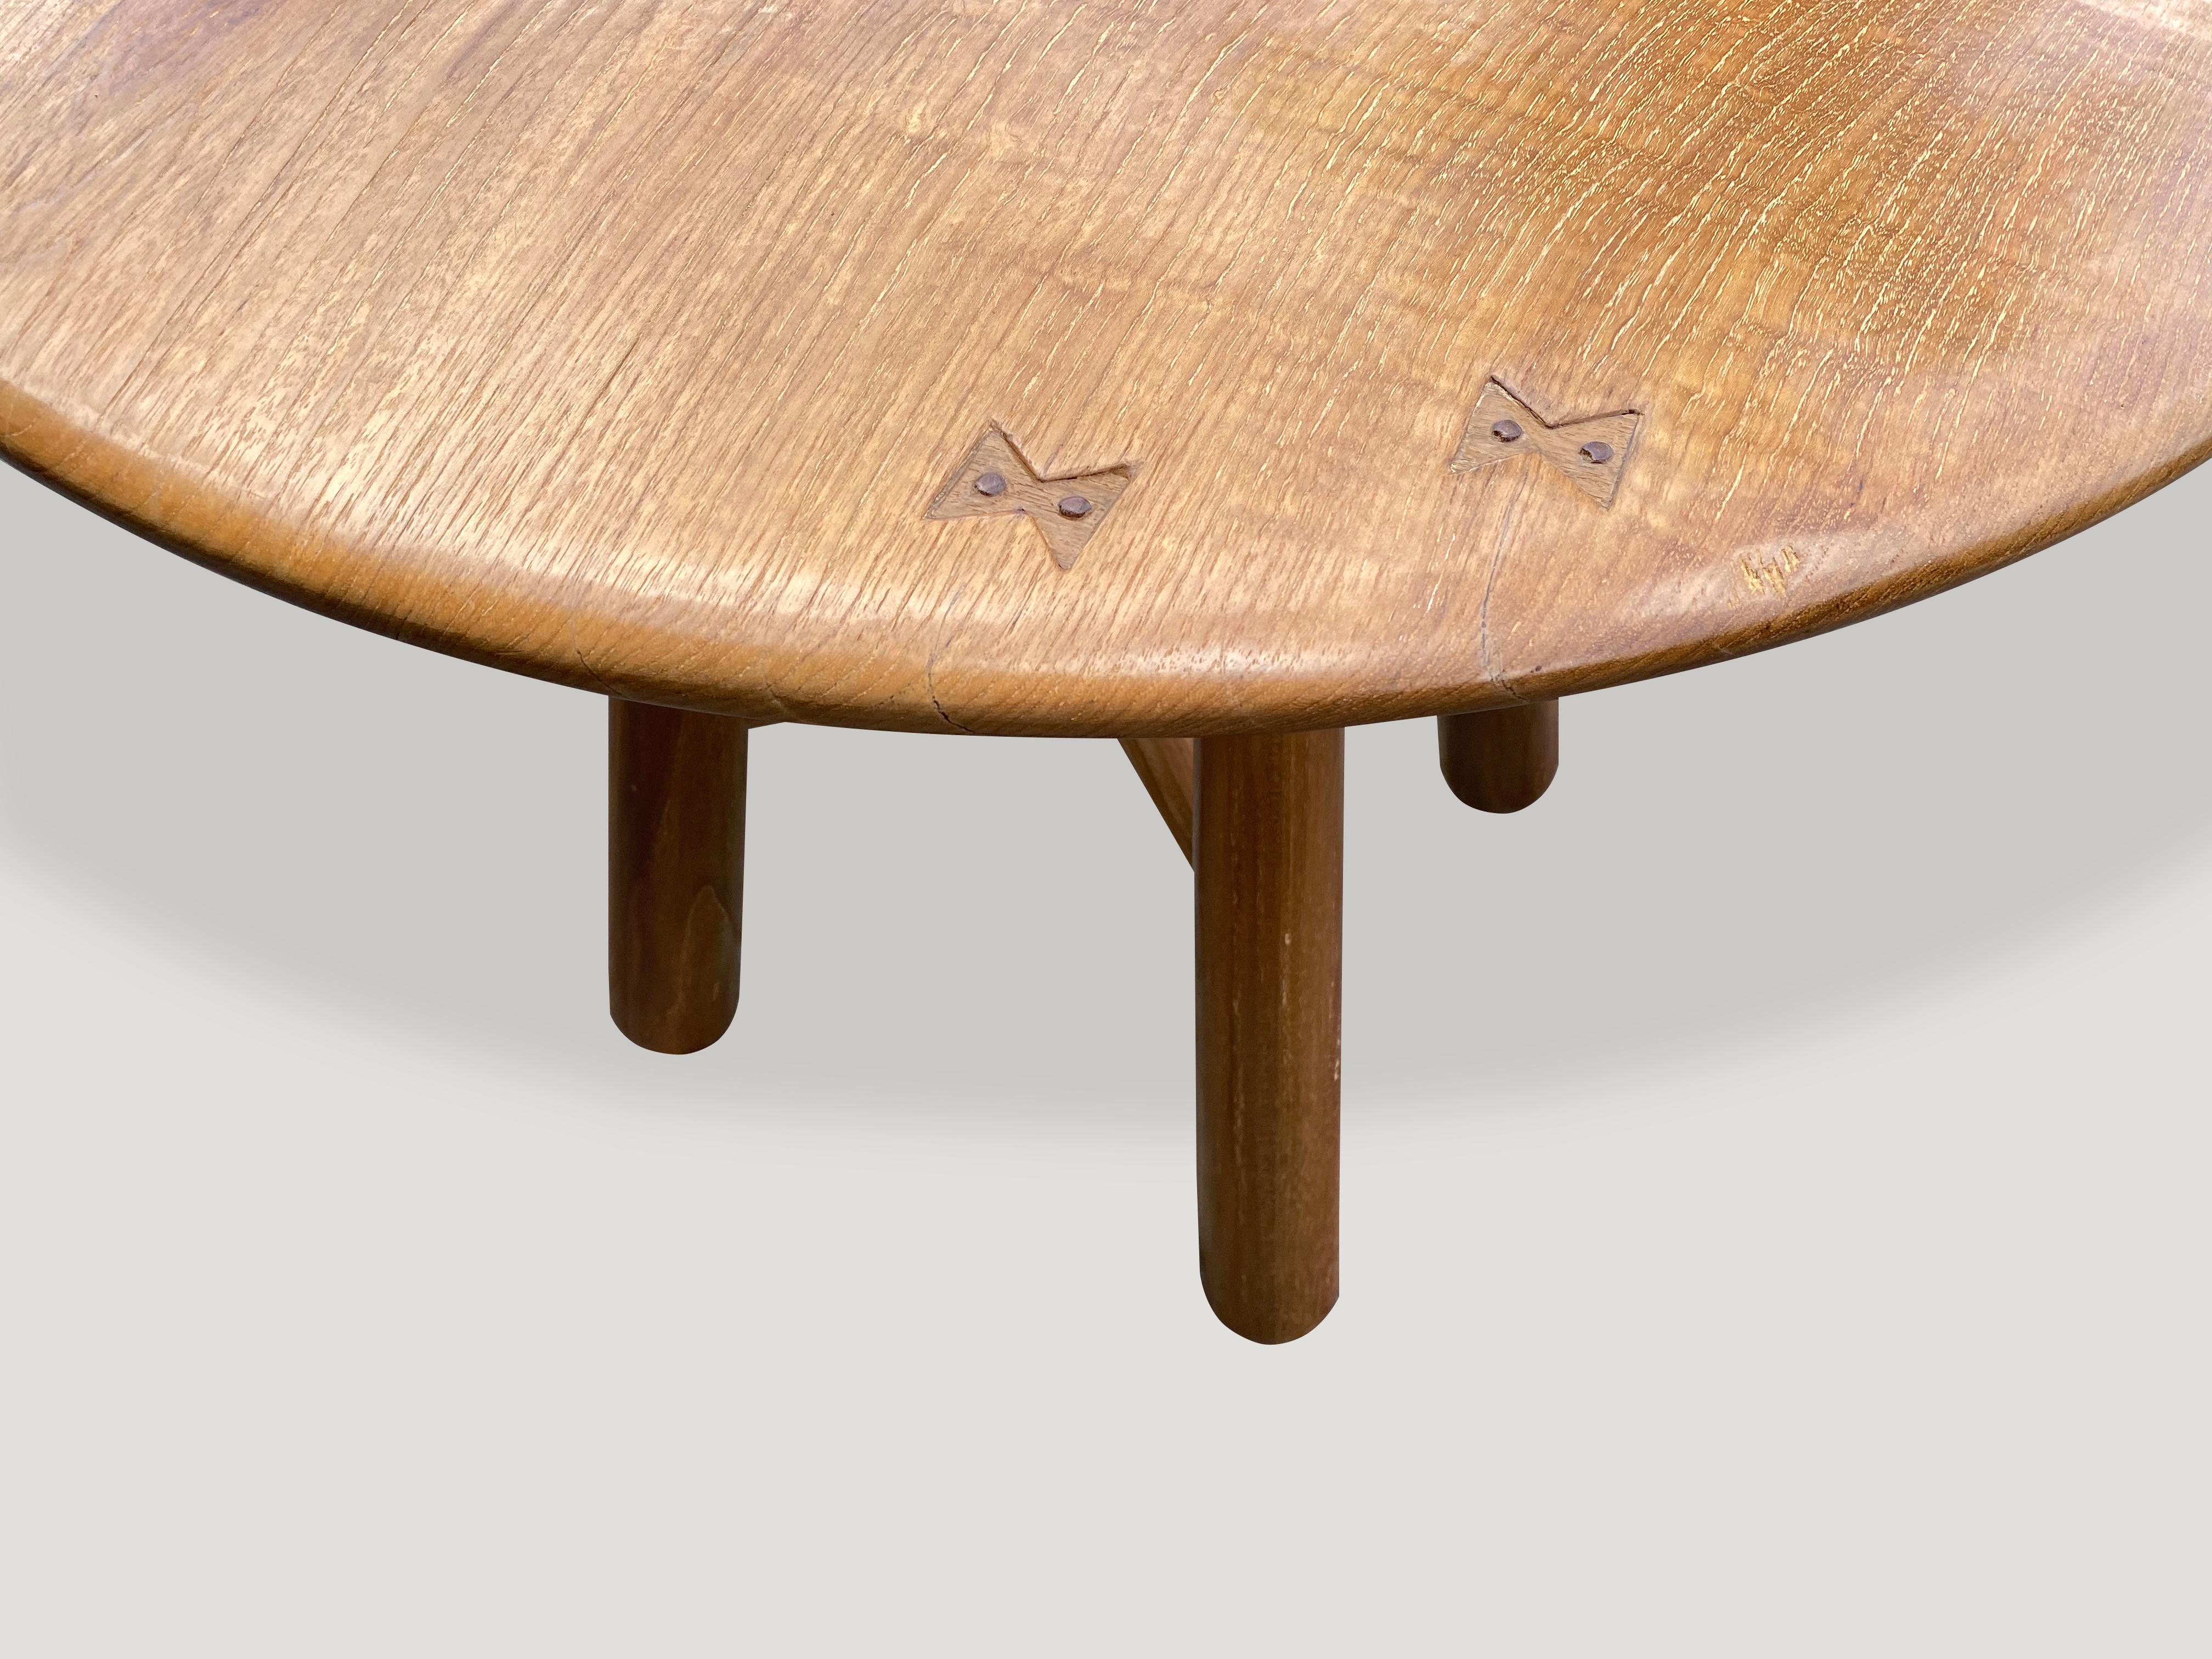 Contemporary Andrianna Shamaris Midcentury Couture Round Teak Table with Butterflies Inlaid For Sale